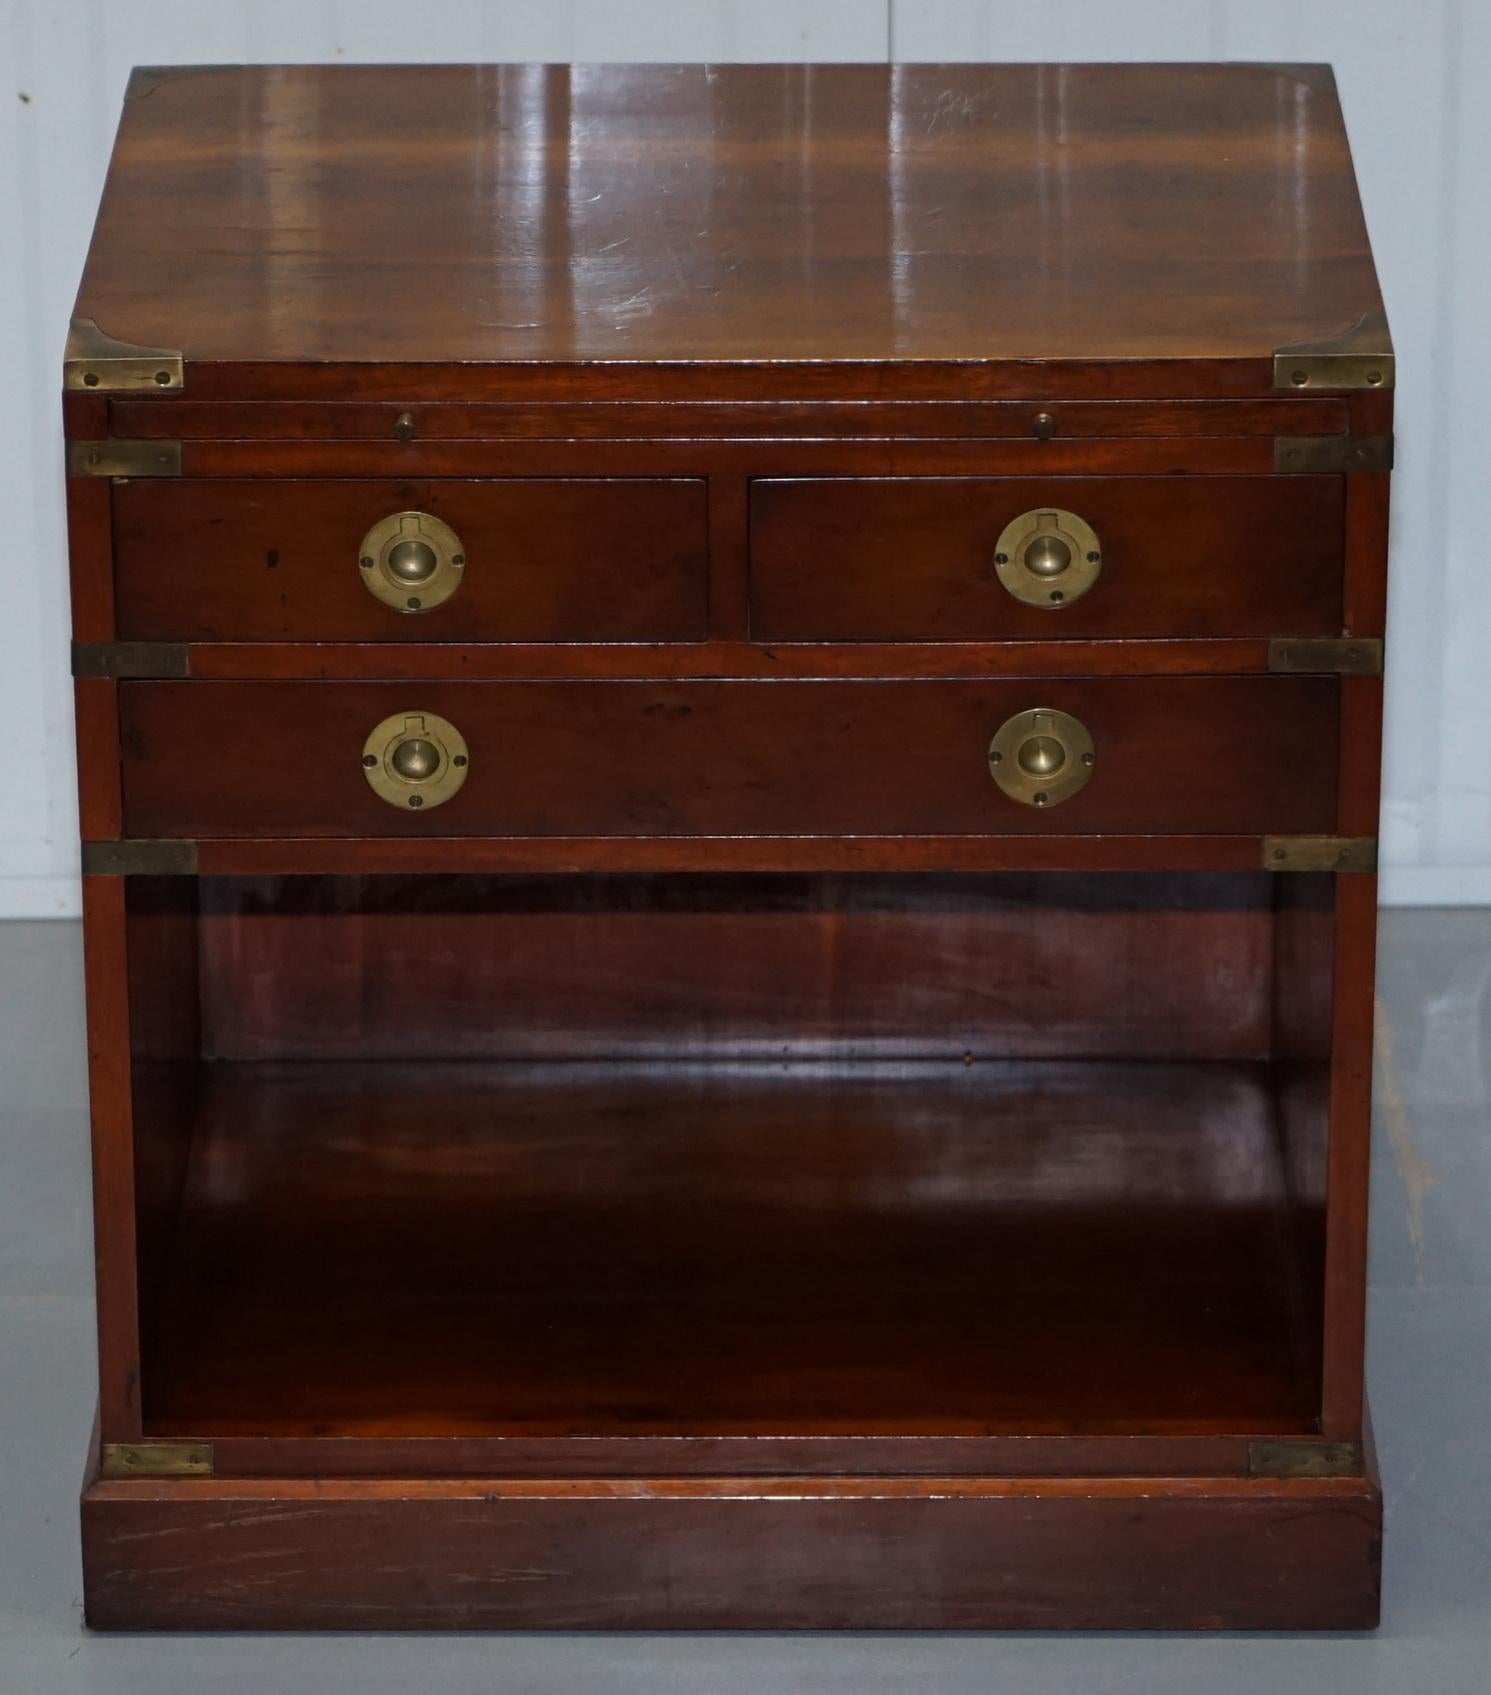 We are delighted to offer for sale this lovely Vintage handmade in England Burr Yew wood chest of drawers in the Military campaign manor with green leather butlers serving tray

Please note the delivery fee listed is just a guide, it covers within